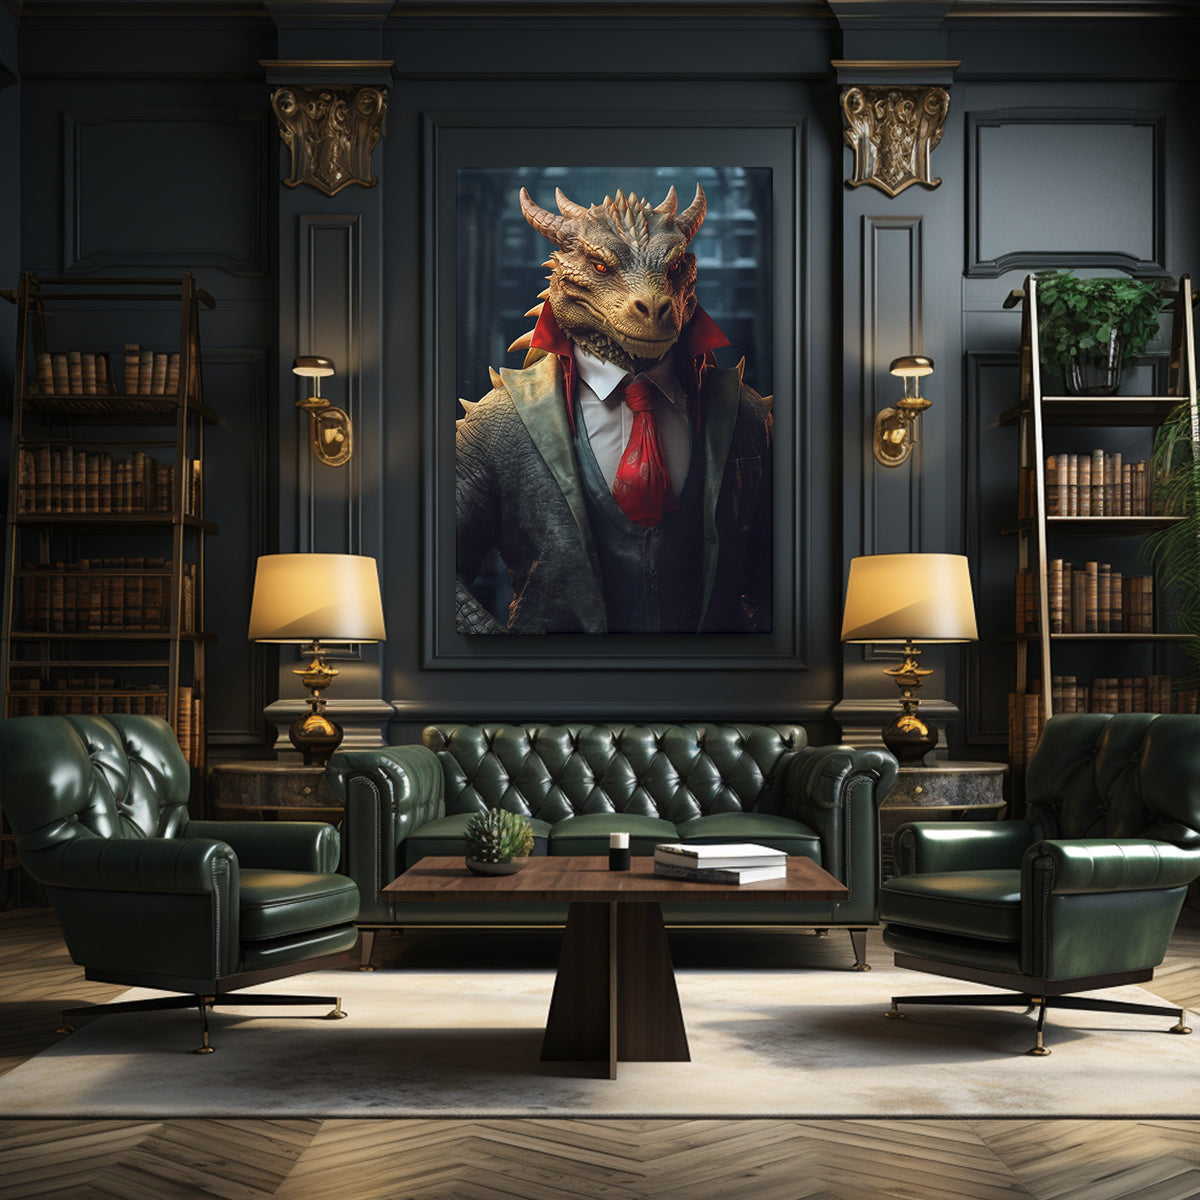 Dapper Dragon in Suit and Tie Canvas Print ArtLexy 1 Panel 16"x24" inches 